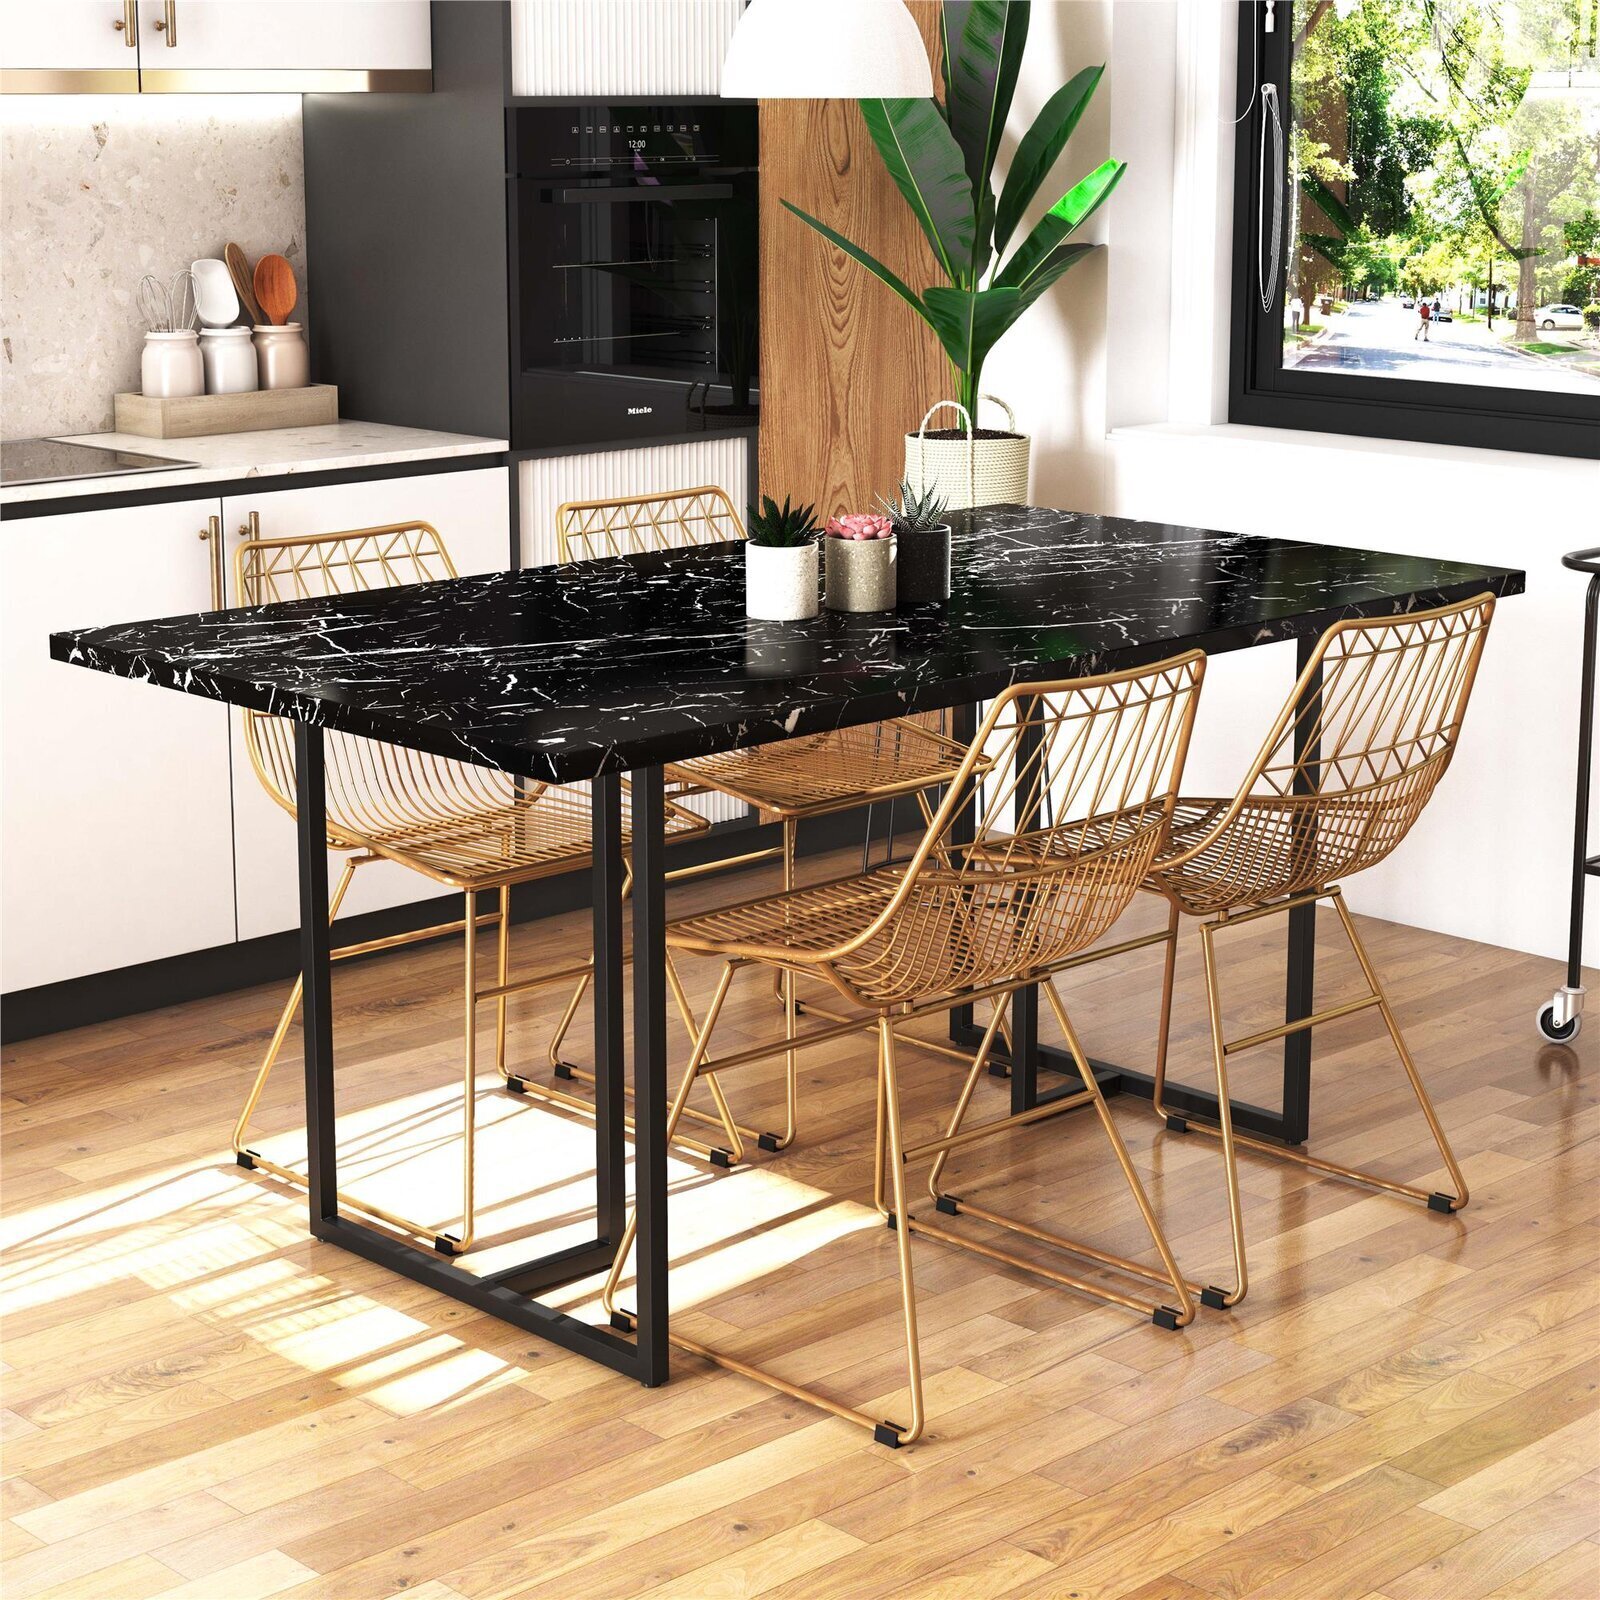 Stylish trestle dining table with faux marble top in black